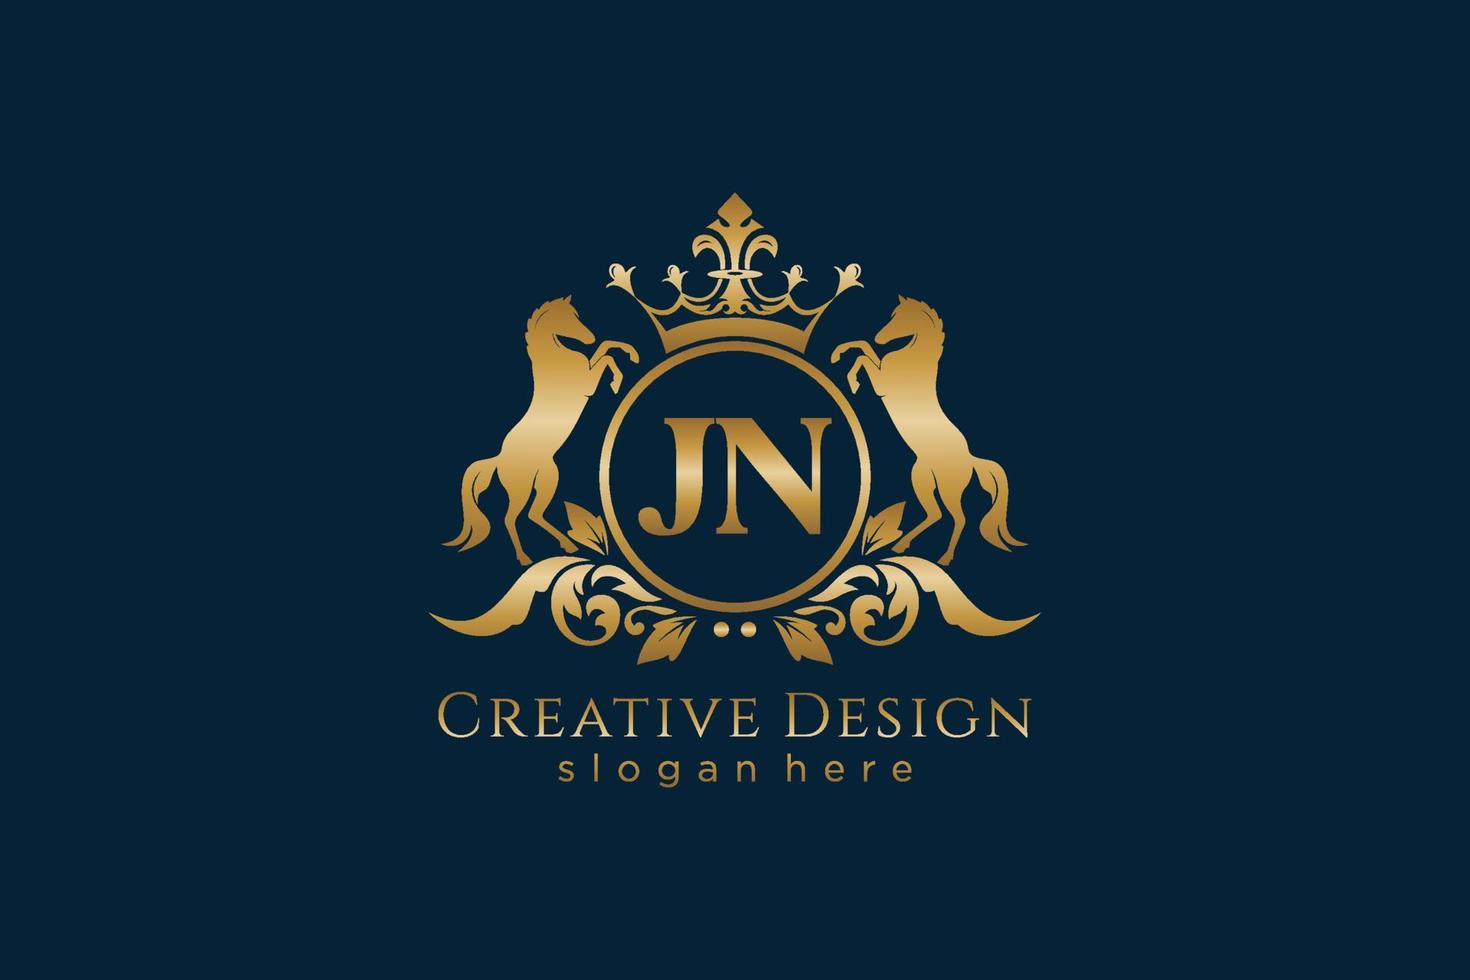 initial JN Retro golden crest with circle and two horses, badge template with scrolls and royal crown - perfect for luxurious branding projects vector